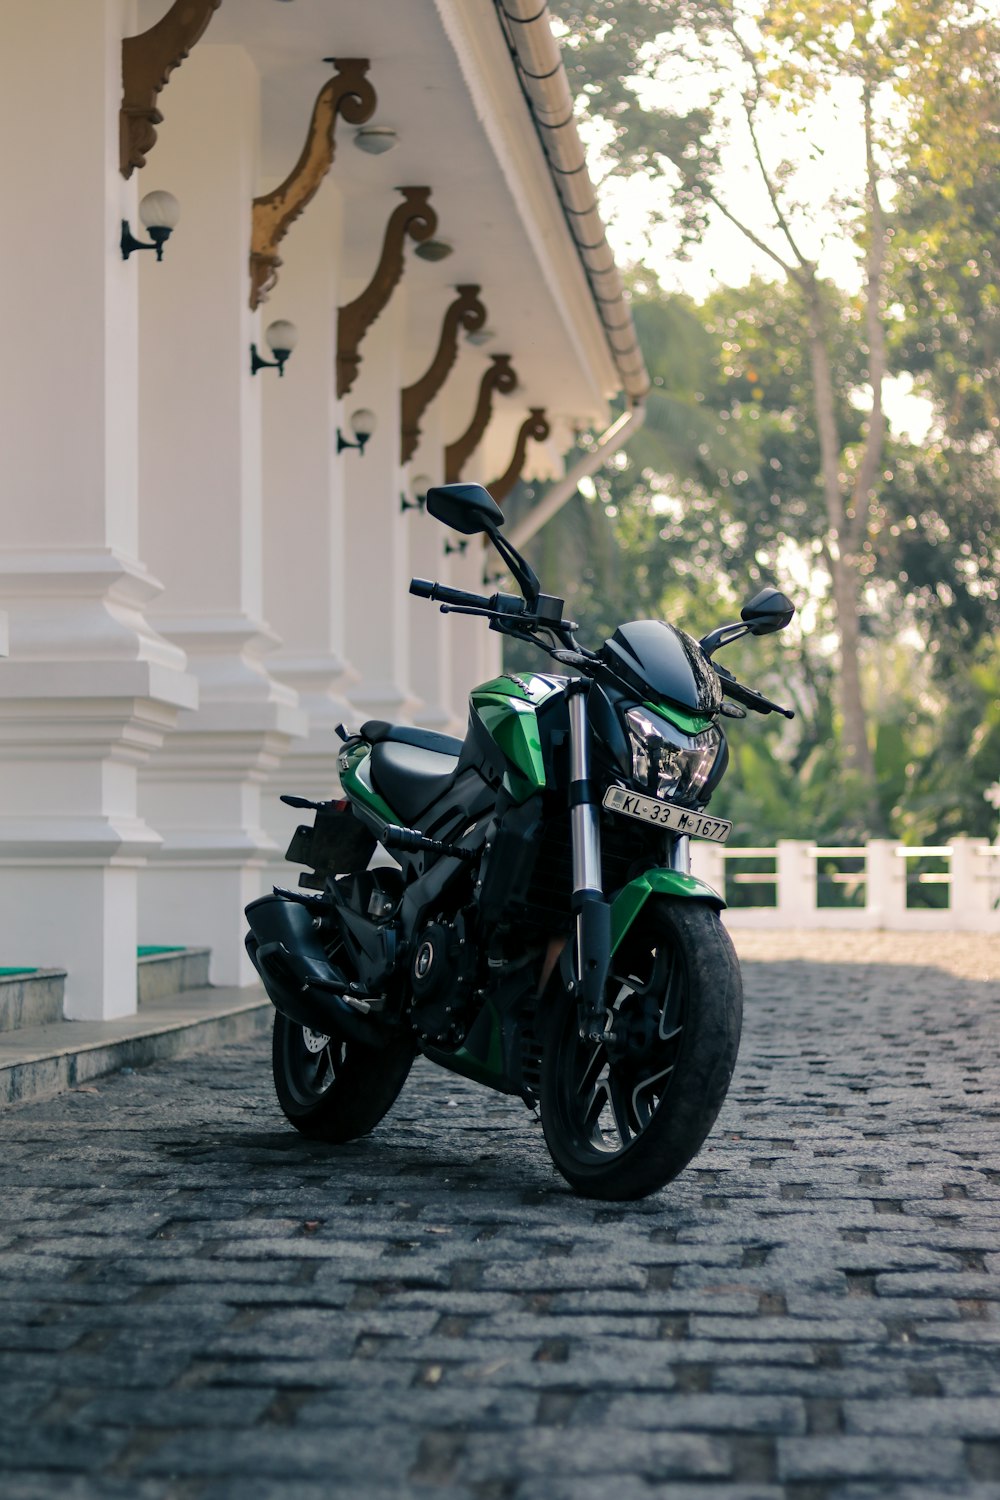 black and green naked motorcycle parked beside white building during daytime